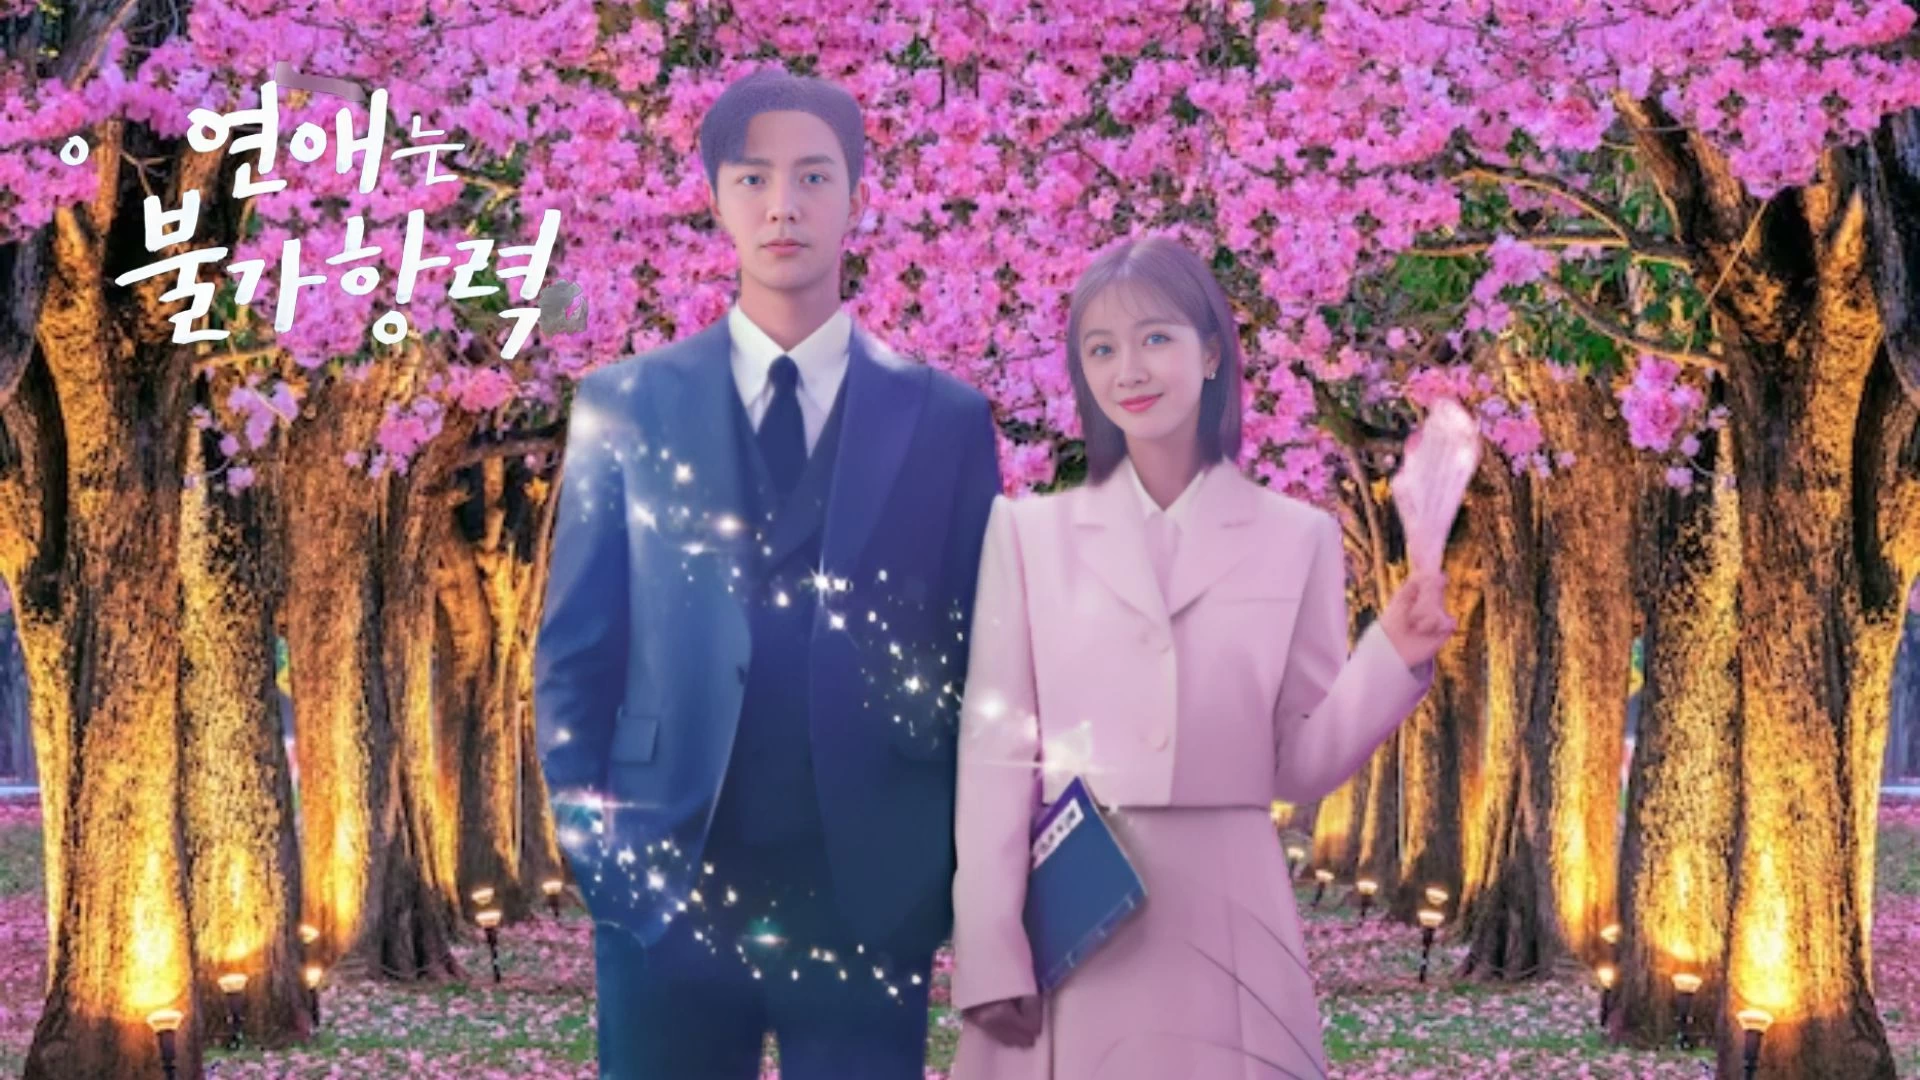 Destined With You Season Episode 16 Ending Explained, Release Date, Cast, Plot, Review, Summary, Where to Wtach And More